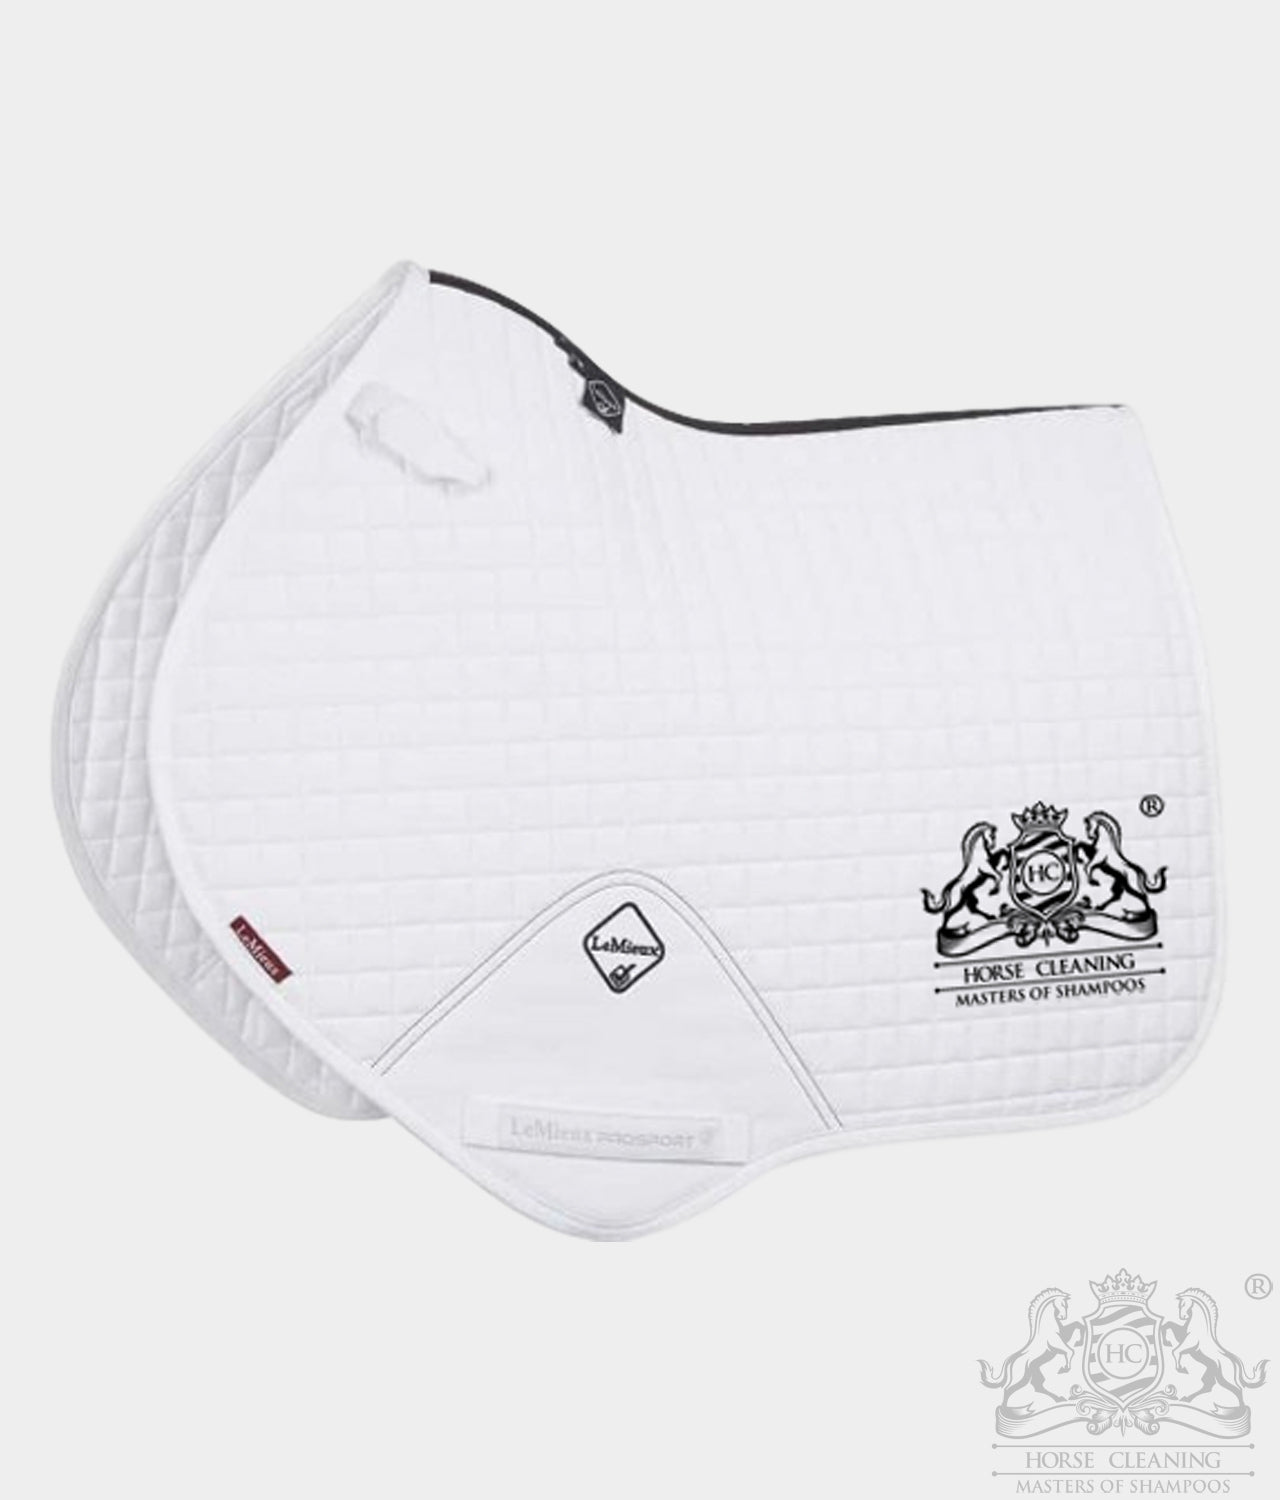 Horse Cleaning ProSport White Close Contact Saddle Pad - Horse Cleaning Masters Of Shampoos ™